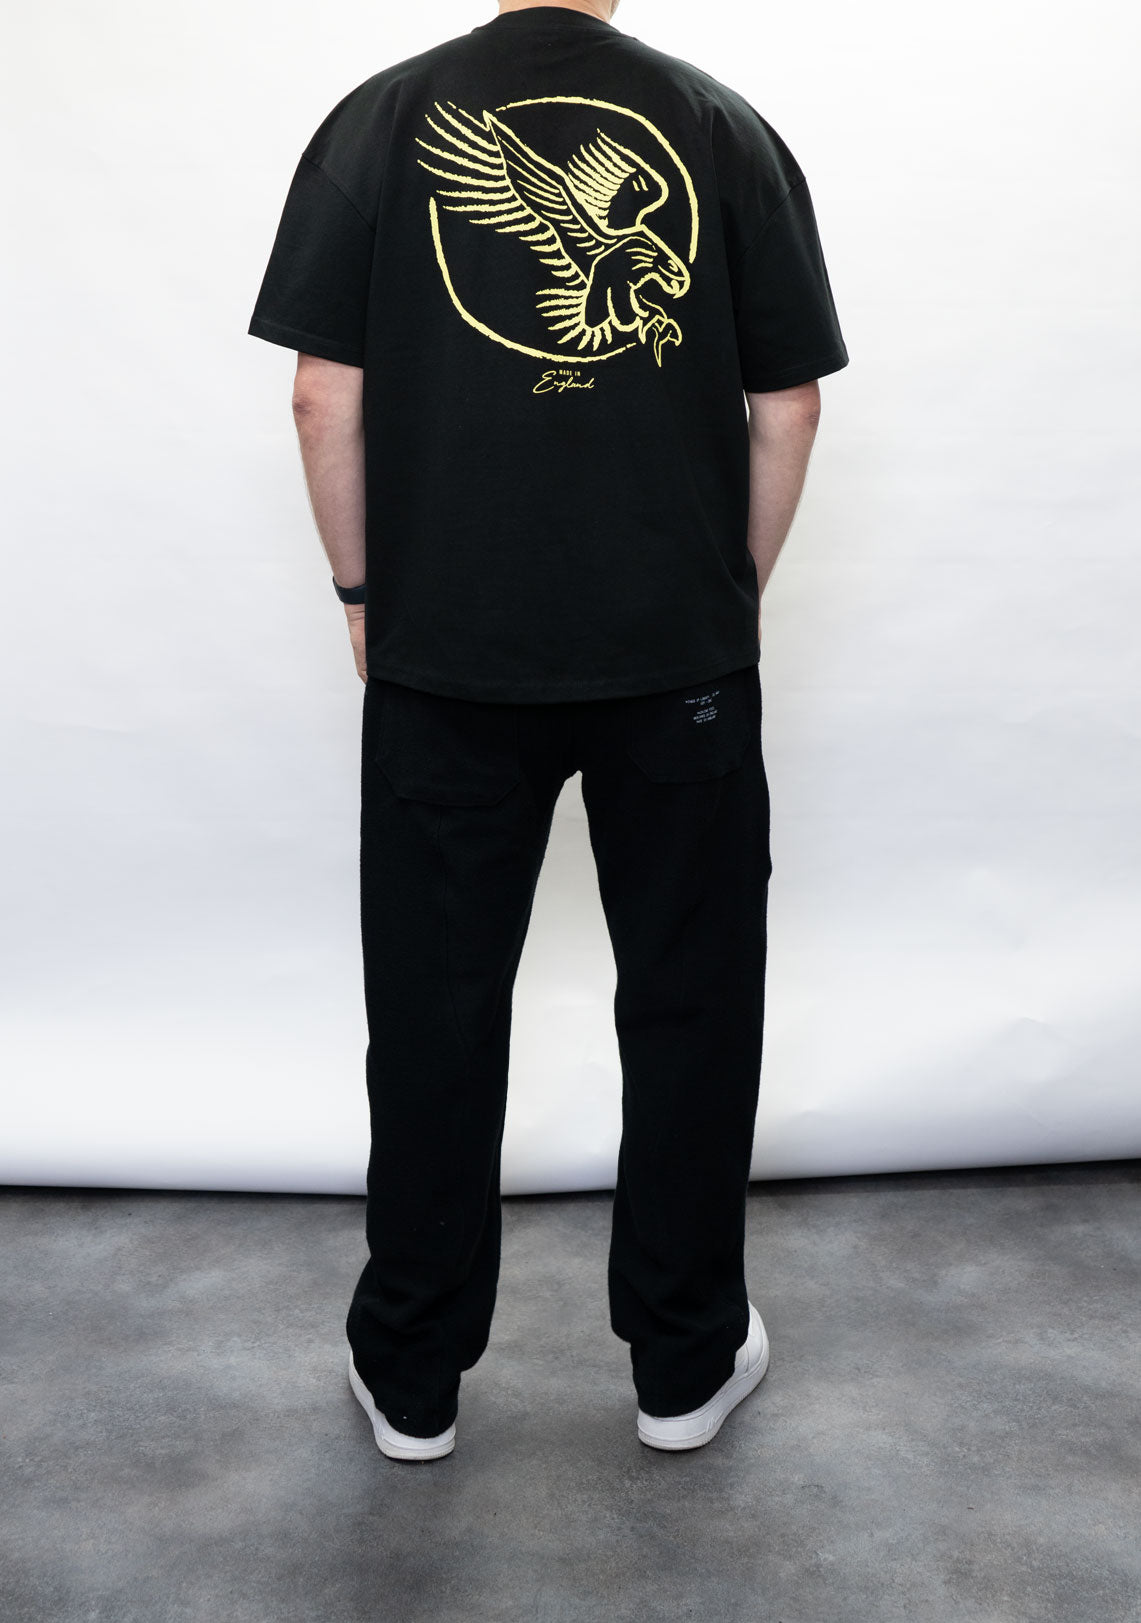 L300 - BLK - Wings Of Liberty Clothing